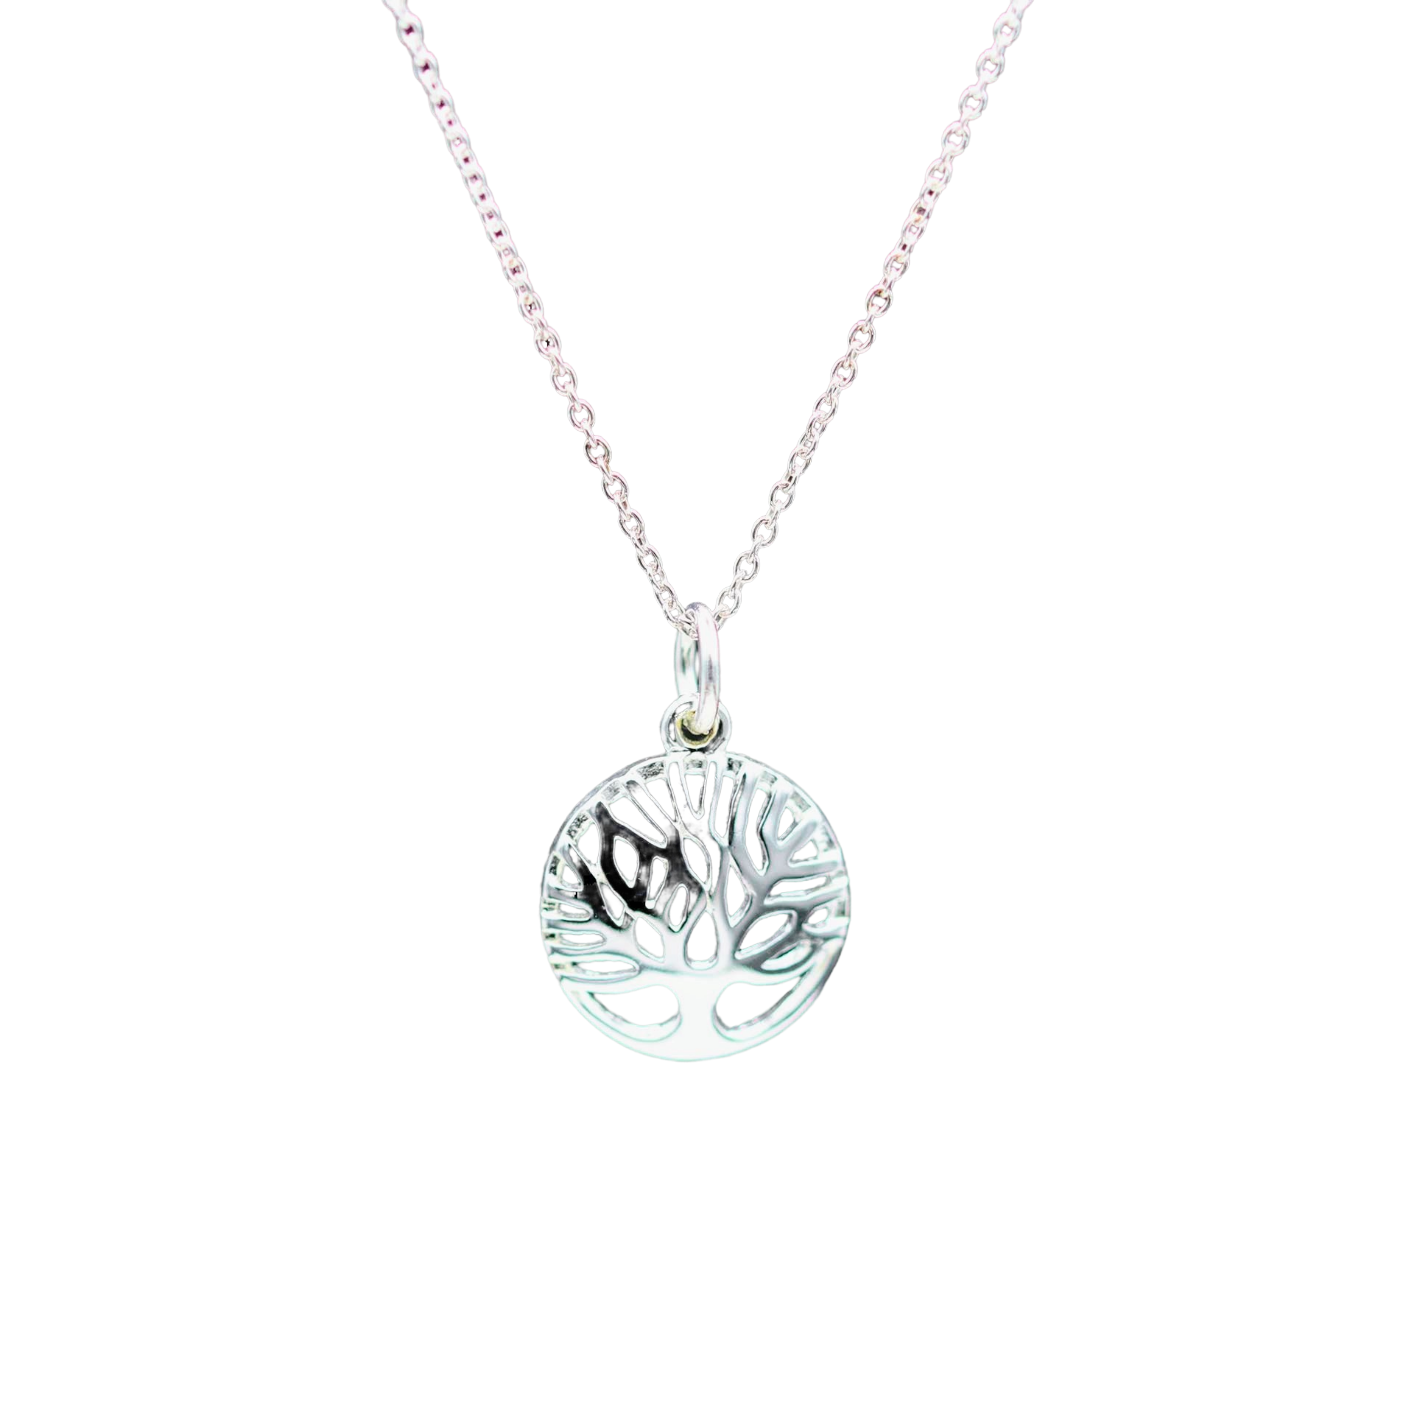 Special Sale 30% OFF @ Checkout- Tree of Life Necklace